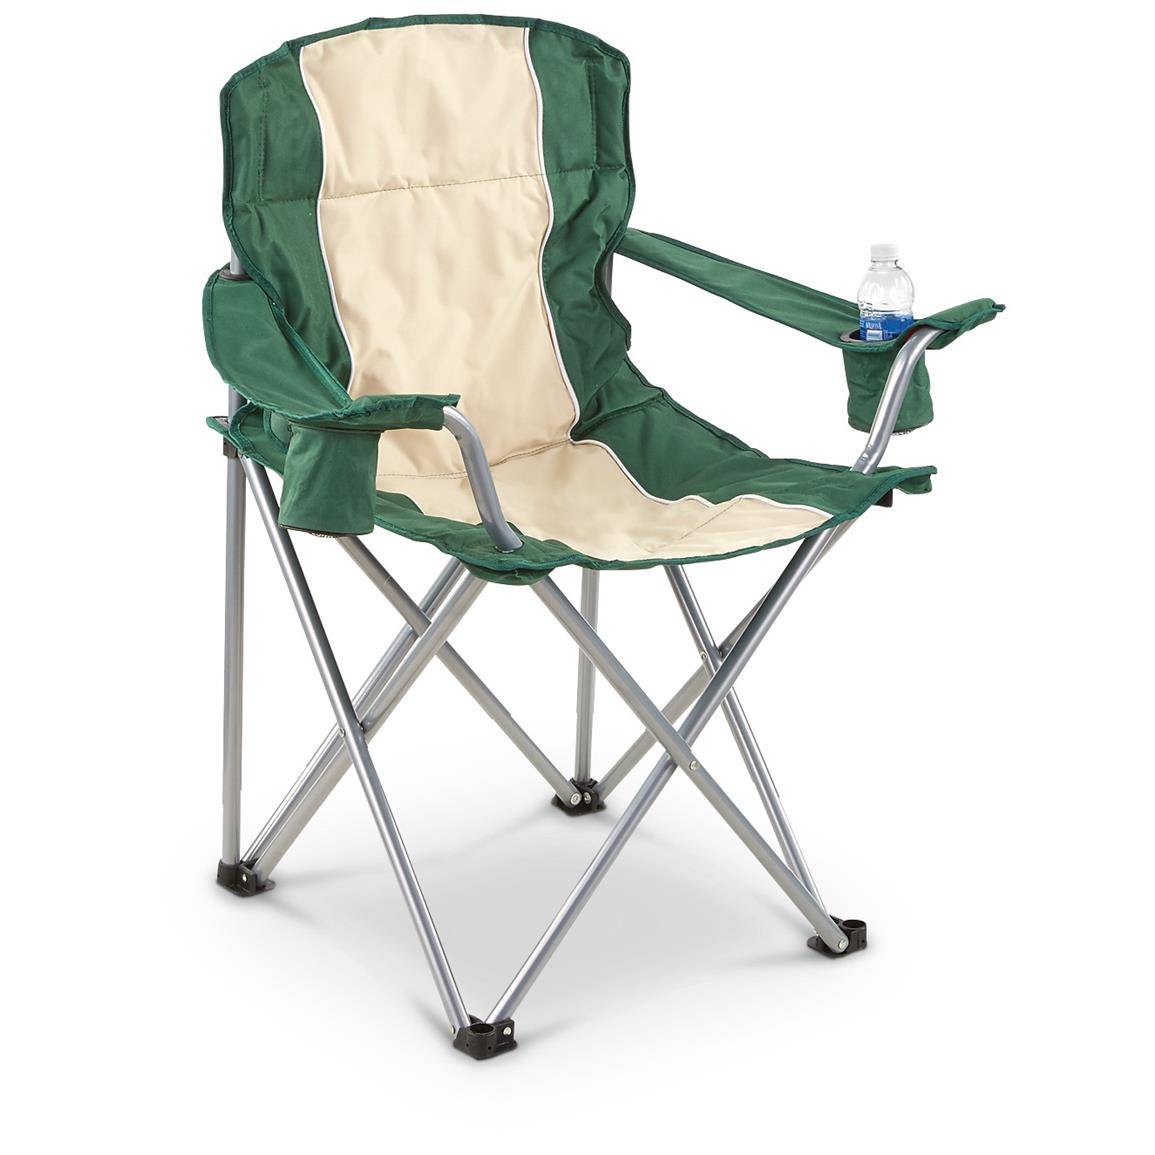  Outdoor  Folding  Camping Chairs  658552 Camping Chairs  at 